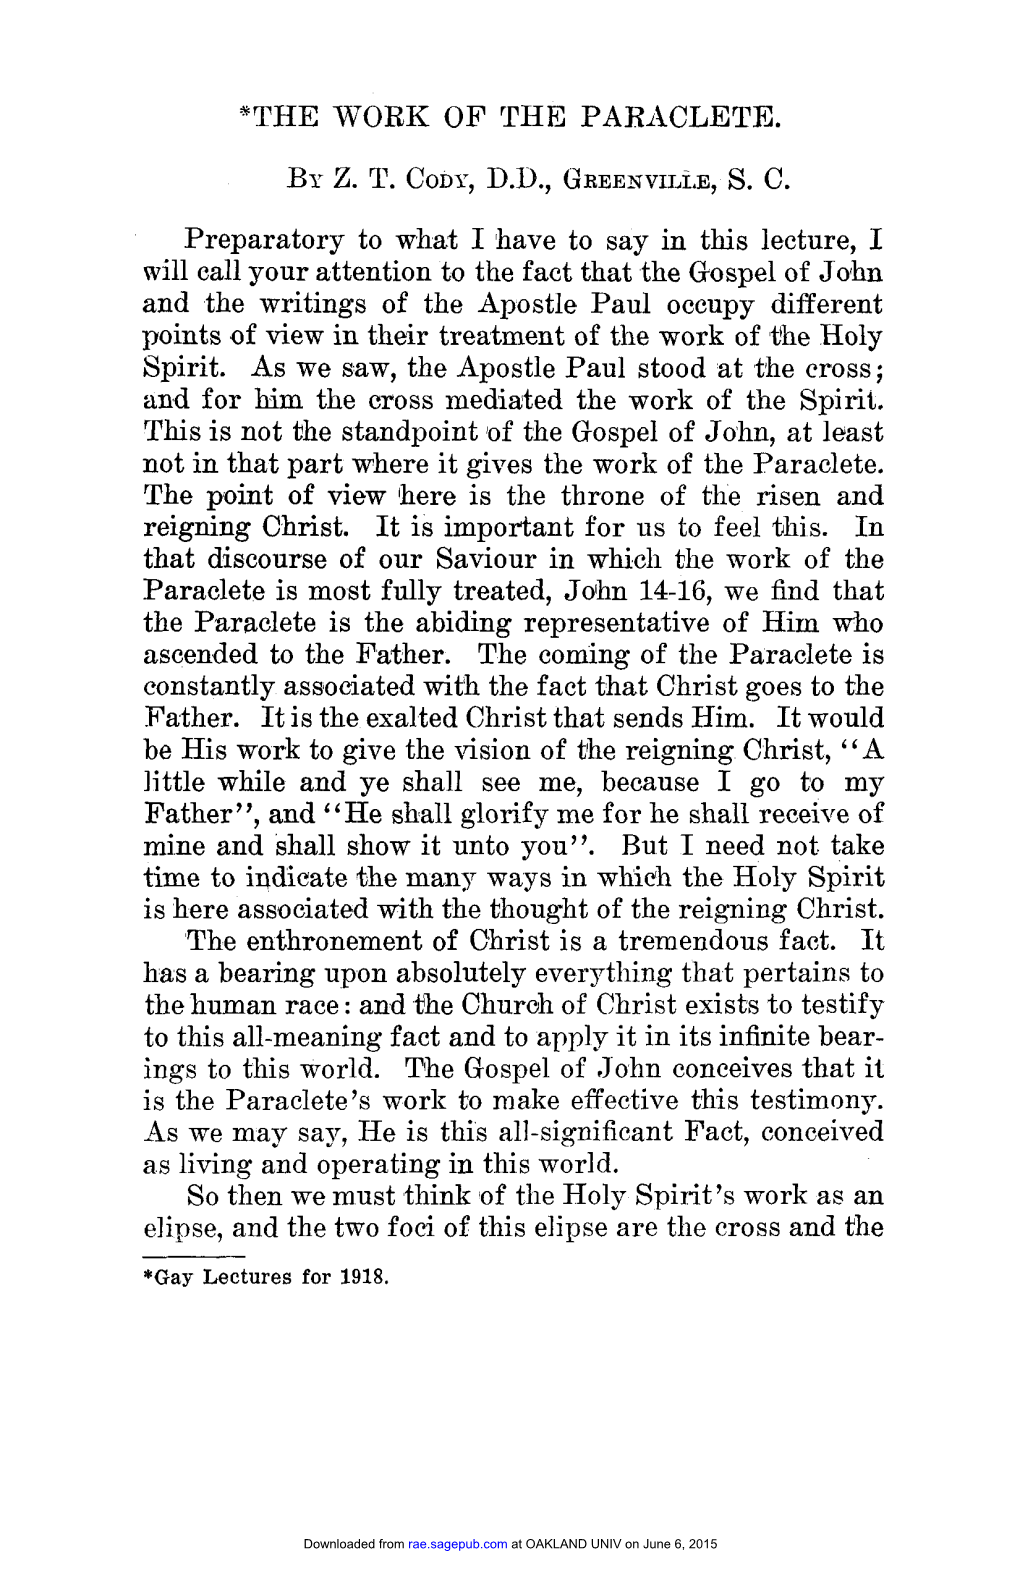 THE WORK of the PARACLETE. Preparatory to What I Have